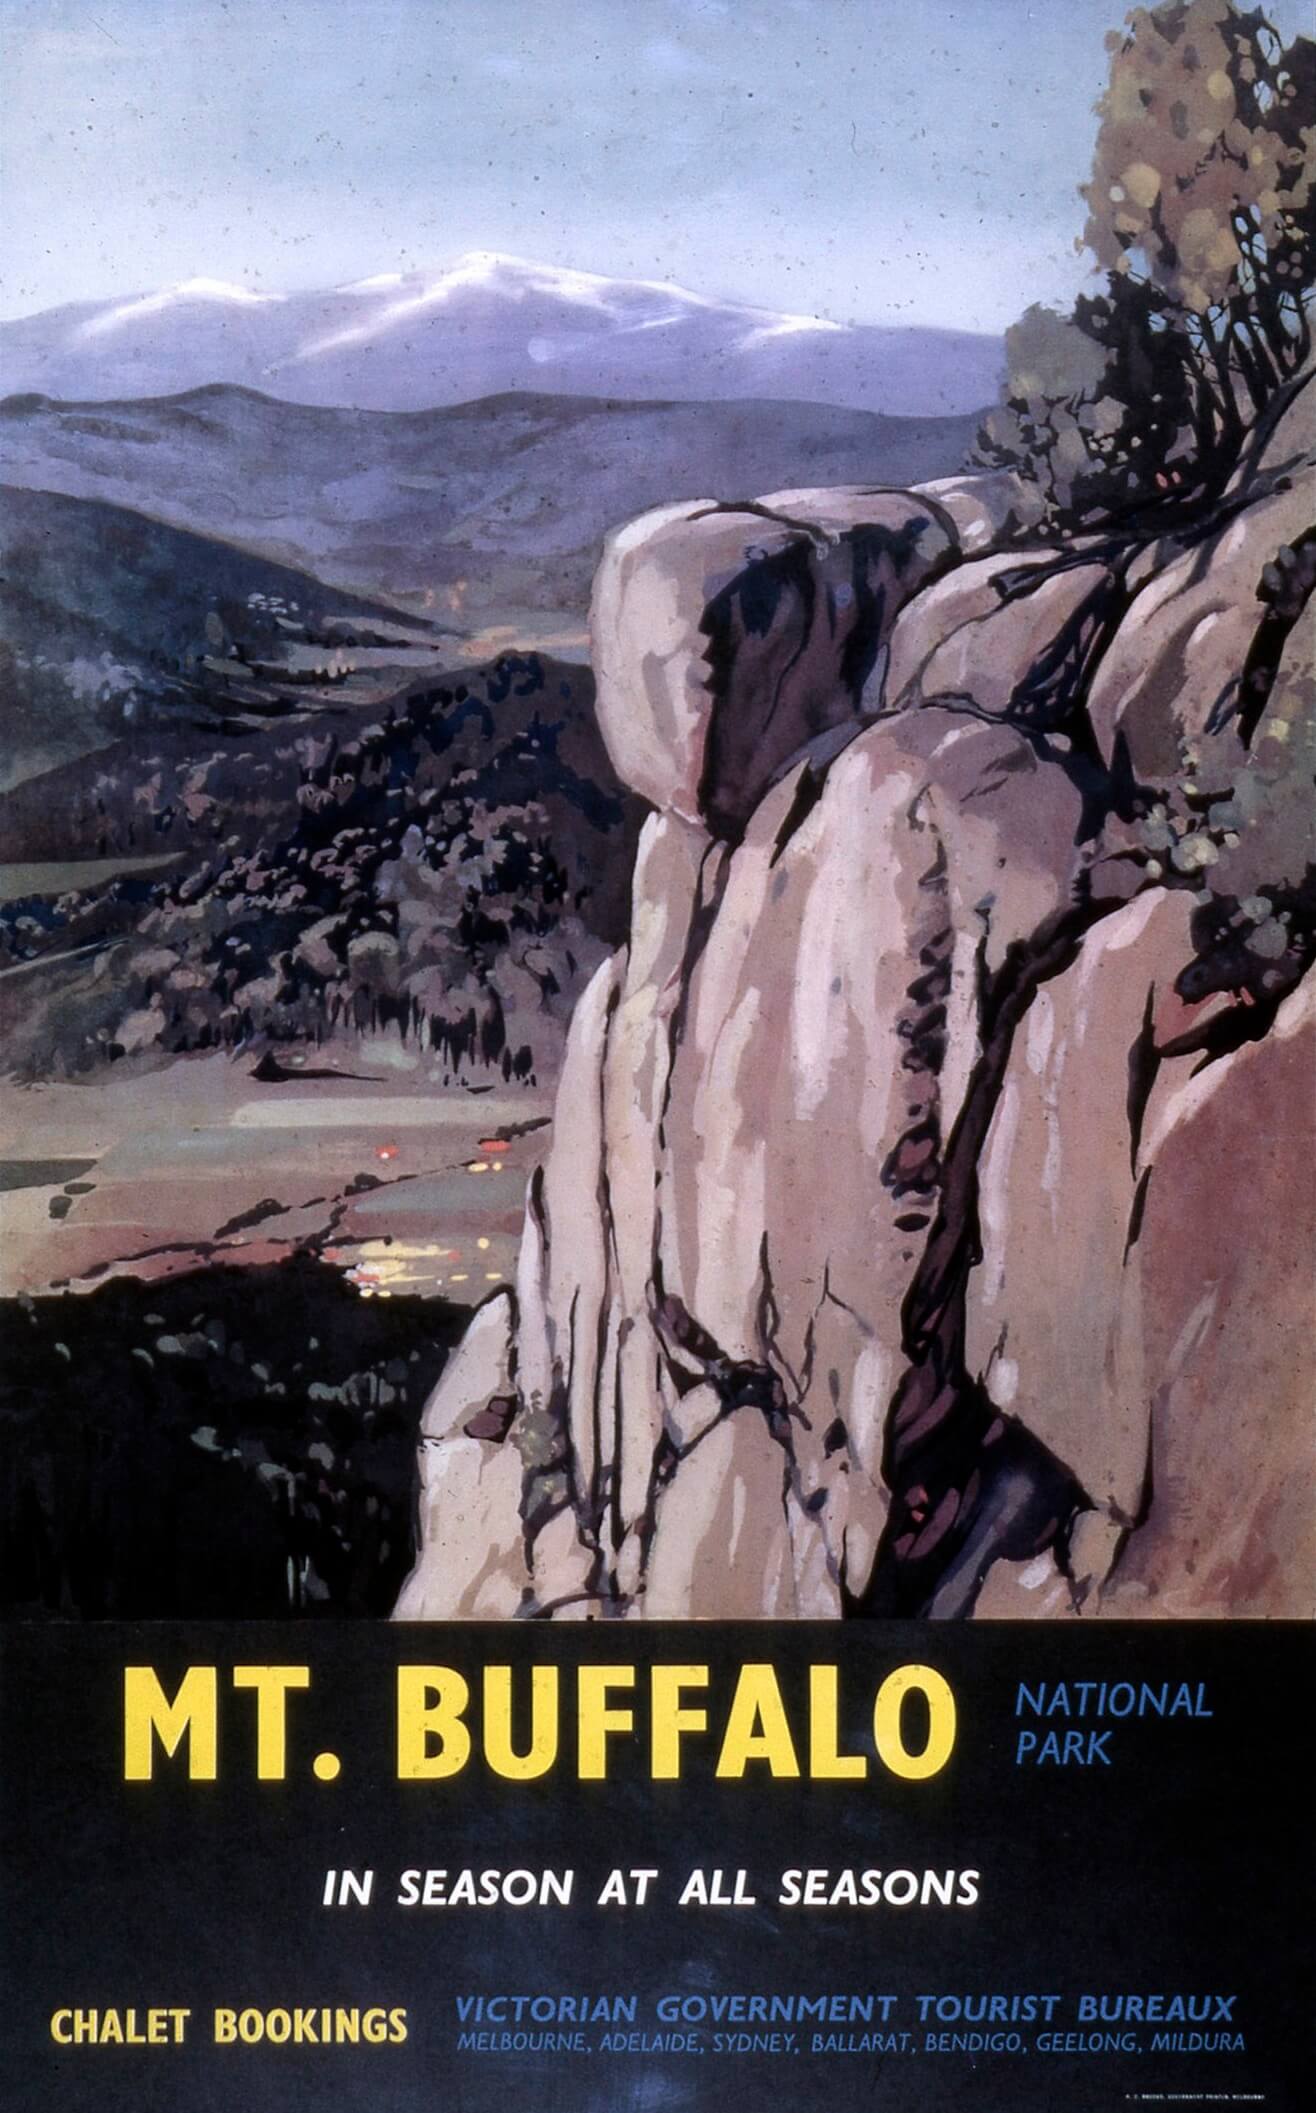 Travel posted. Drawn image depicts a large rock mountain in the foreground with valley and distant mountains in the background. It's coloured in blue and brown tones. Writing on the bottom of the image reads: "Mt. Buffalo National Park. In season at all seasons"